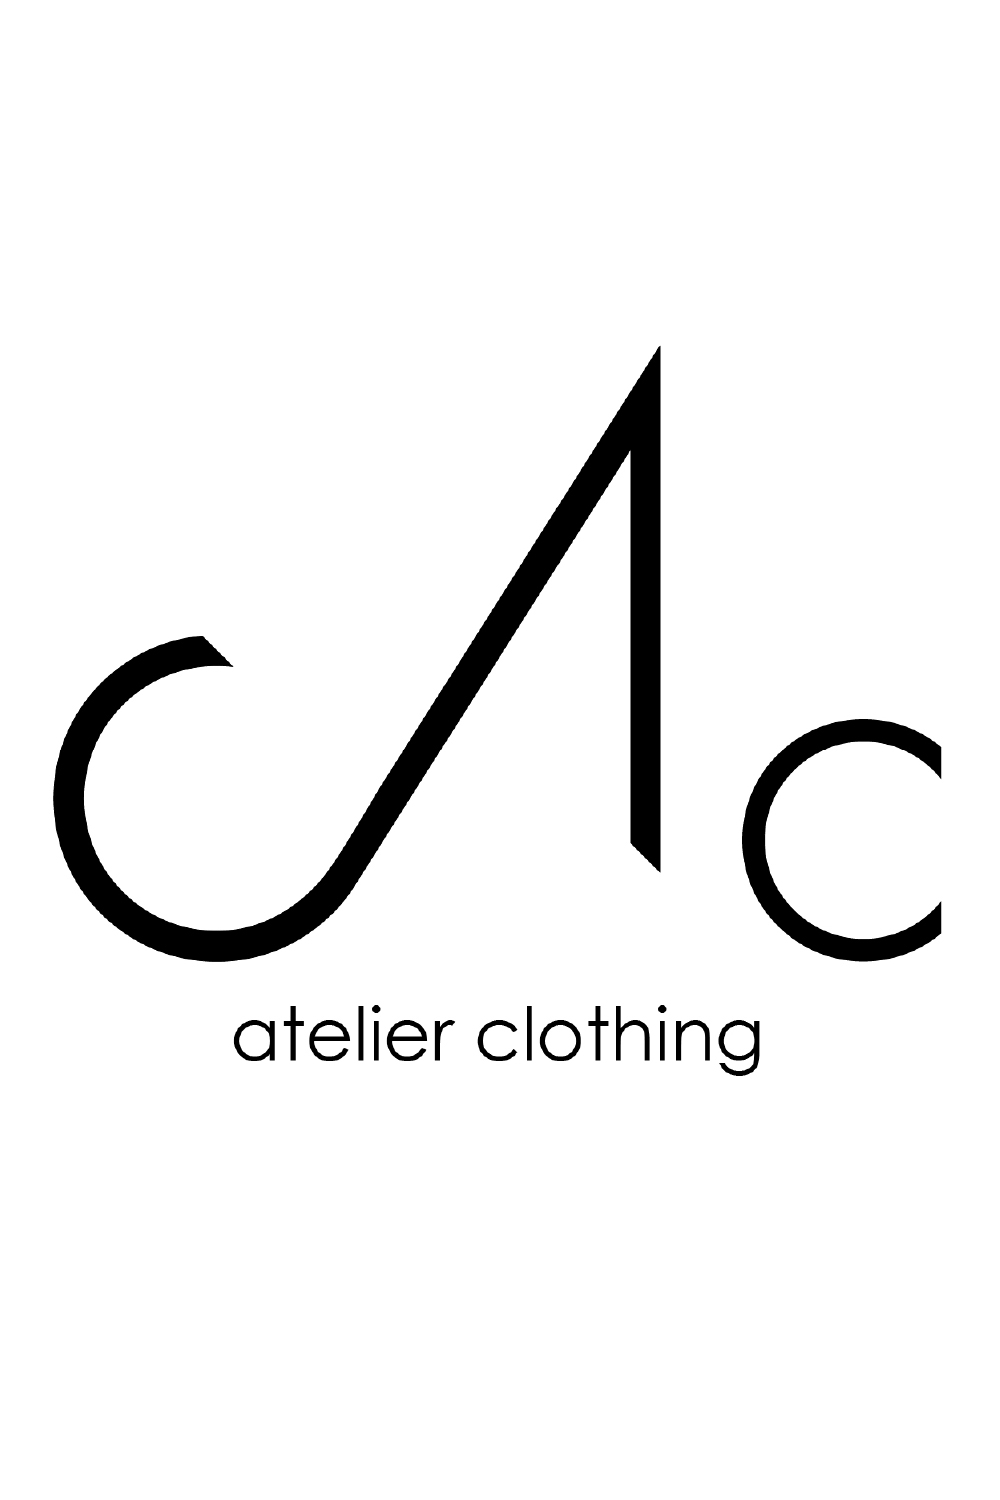 Logo for a clothing atelier pinterest preview image.